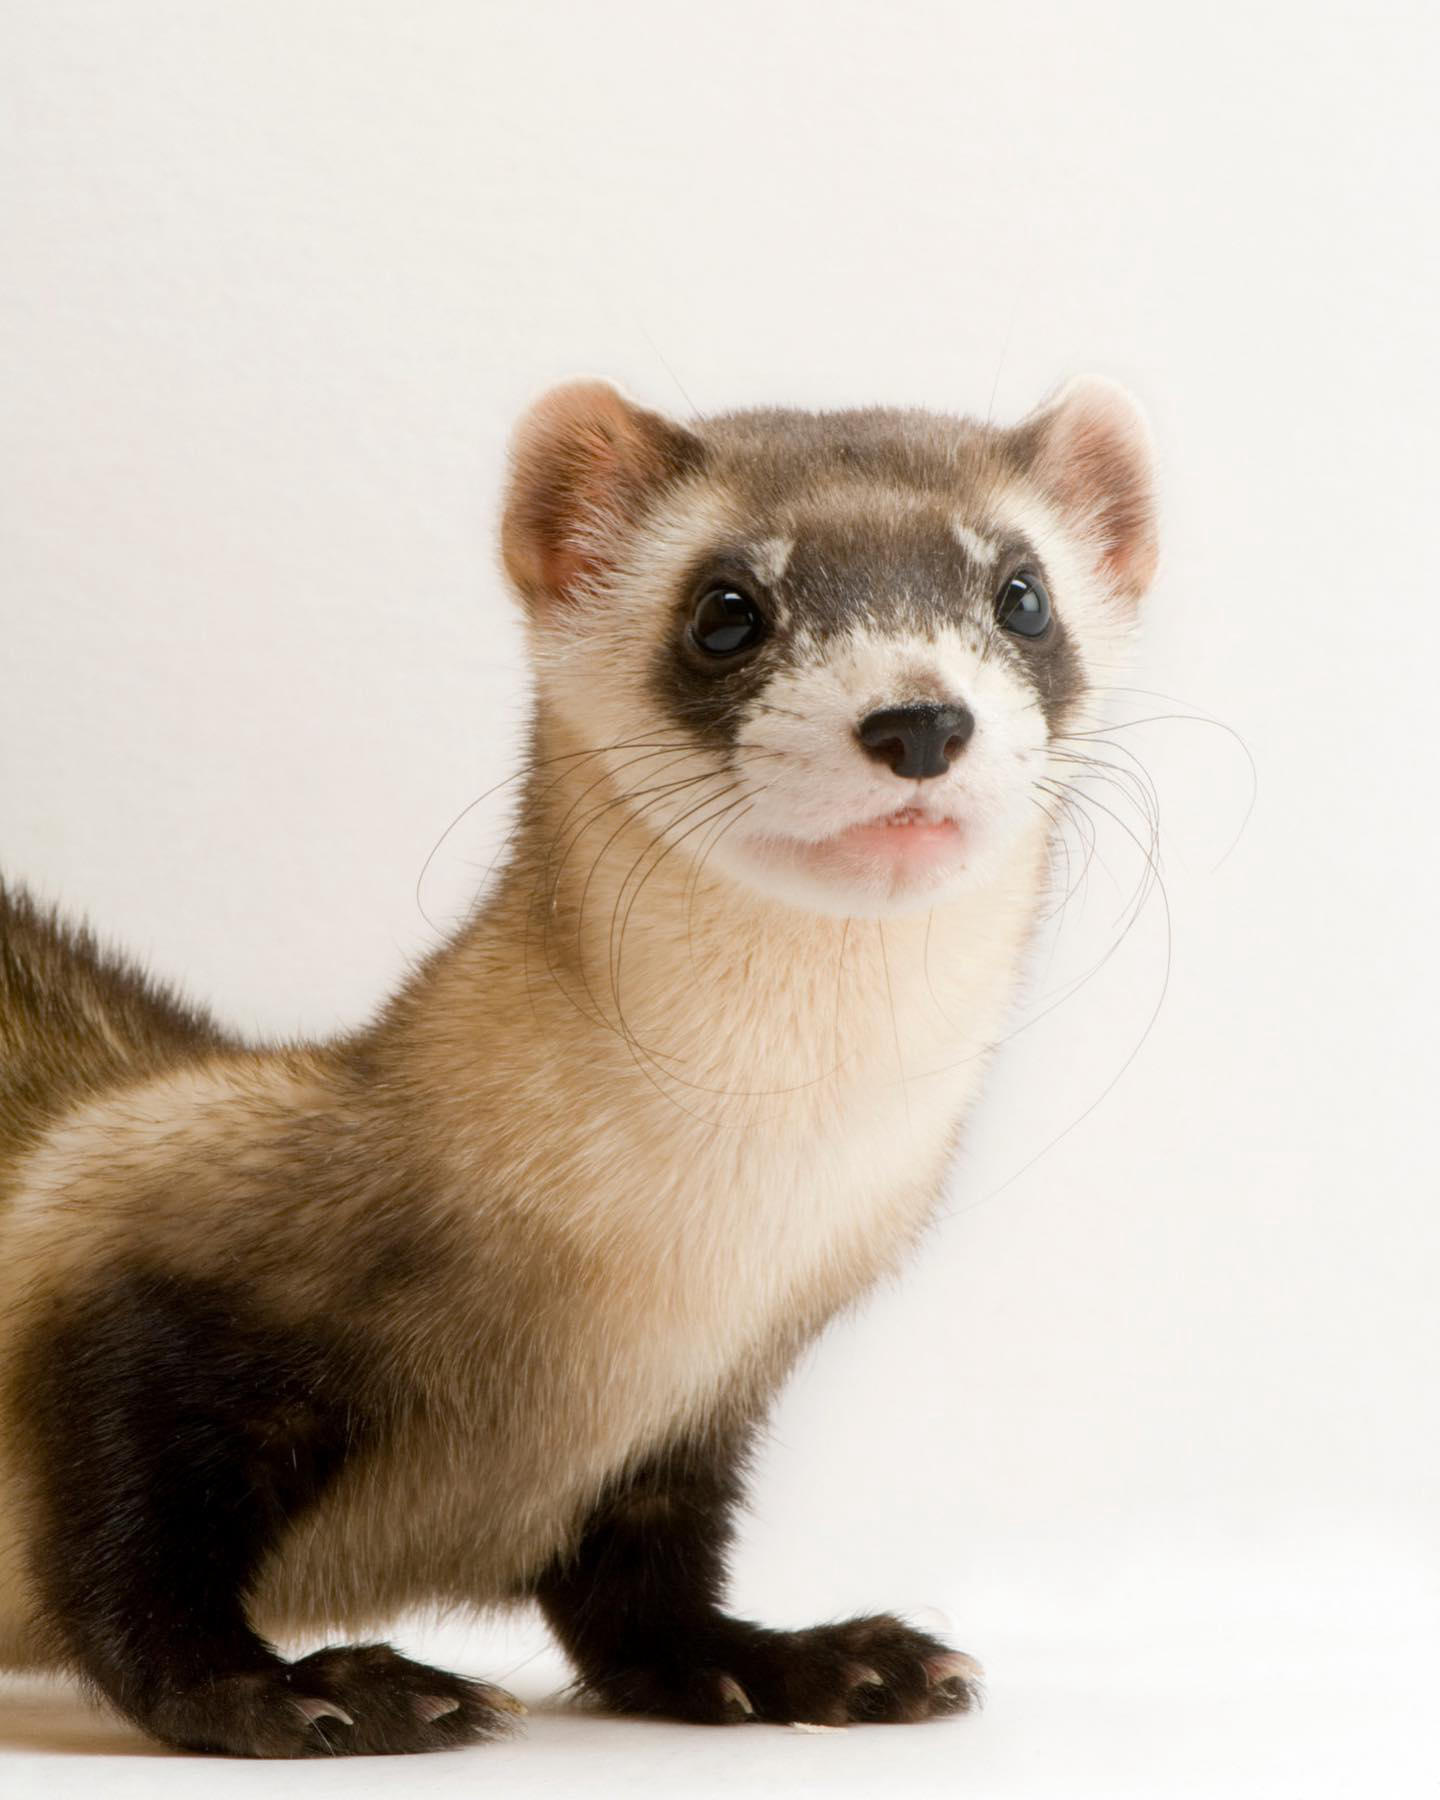 A black-footed ferret makes a rare stop in front of the camera during a photo shoot #cheyennemountai